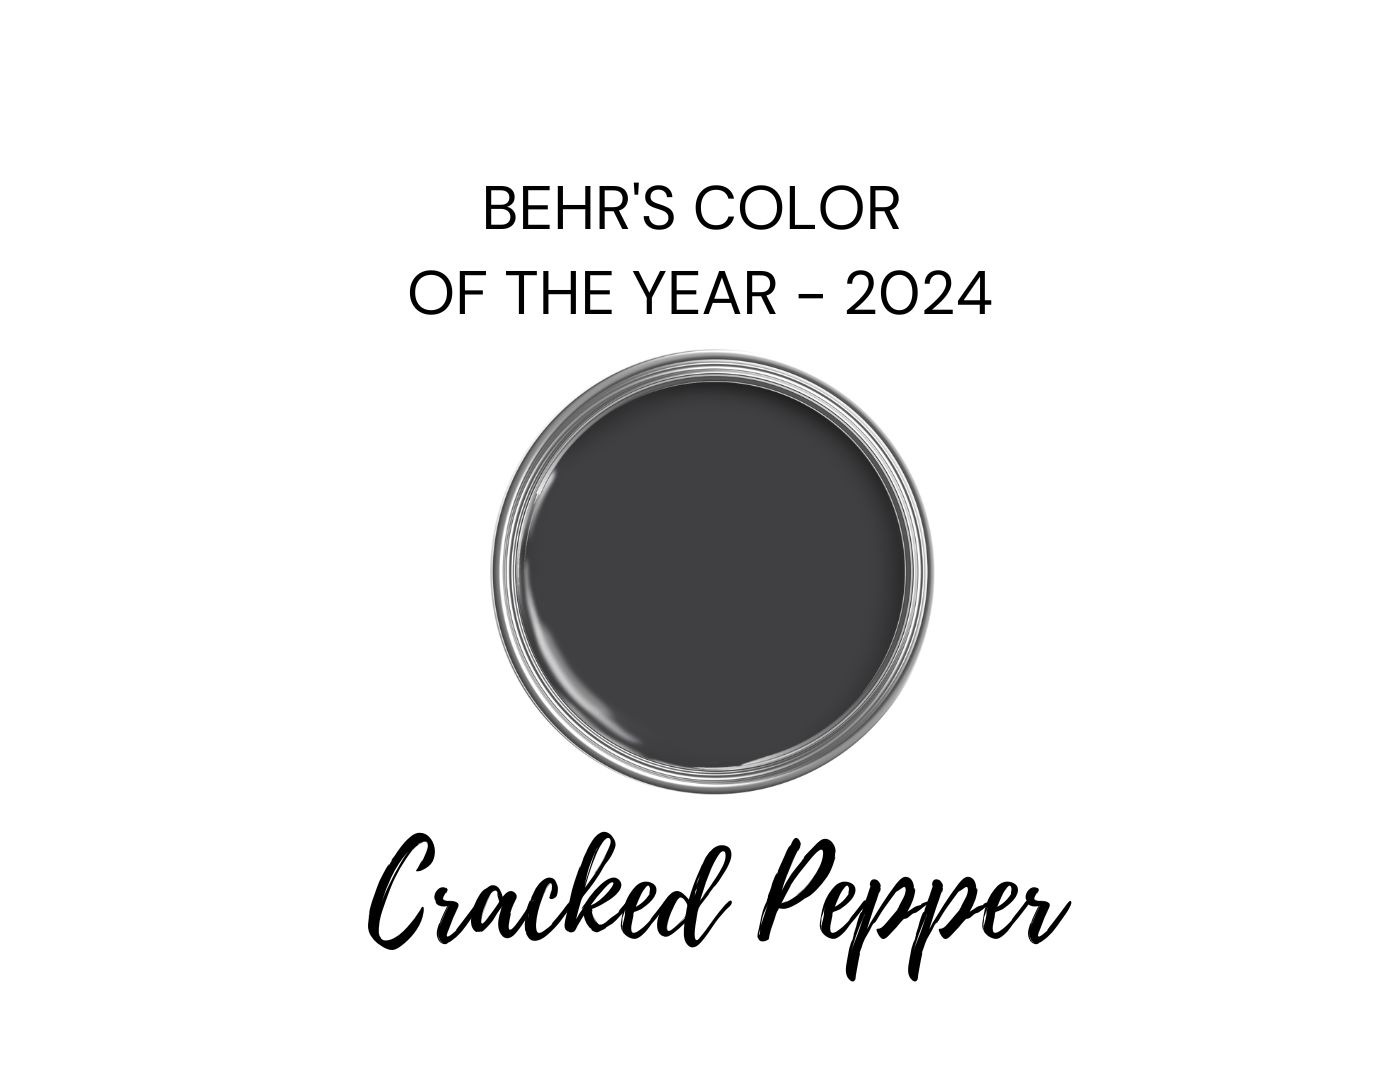 BEHR CRACKED PEPPER, SOFT BLACK PAINT COLOR. KYLIE M INTERIOR EDESIGN AND THE 2024 COLOR OF THE YEAR